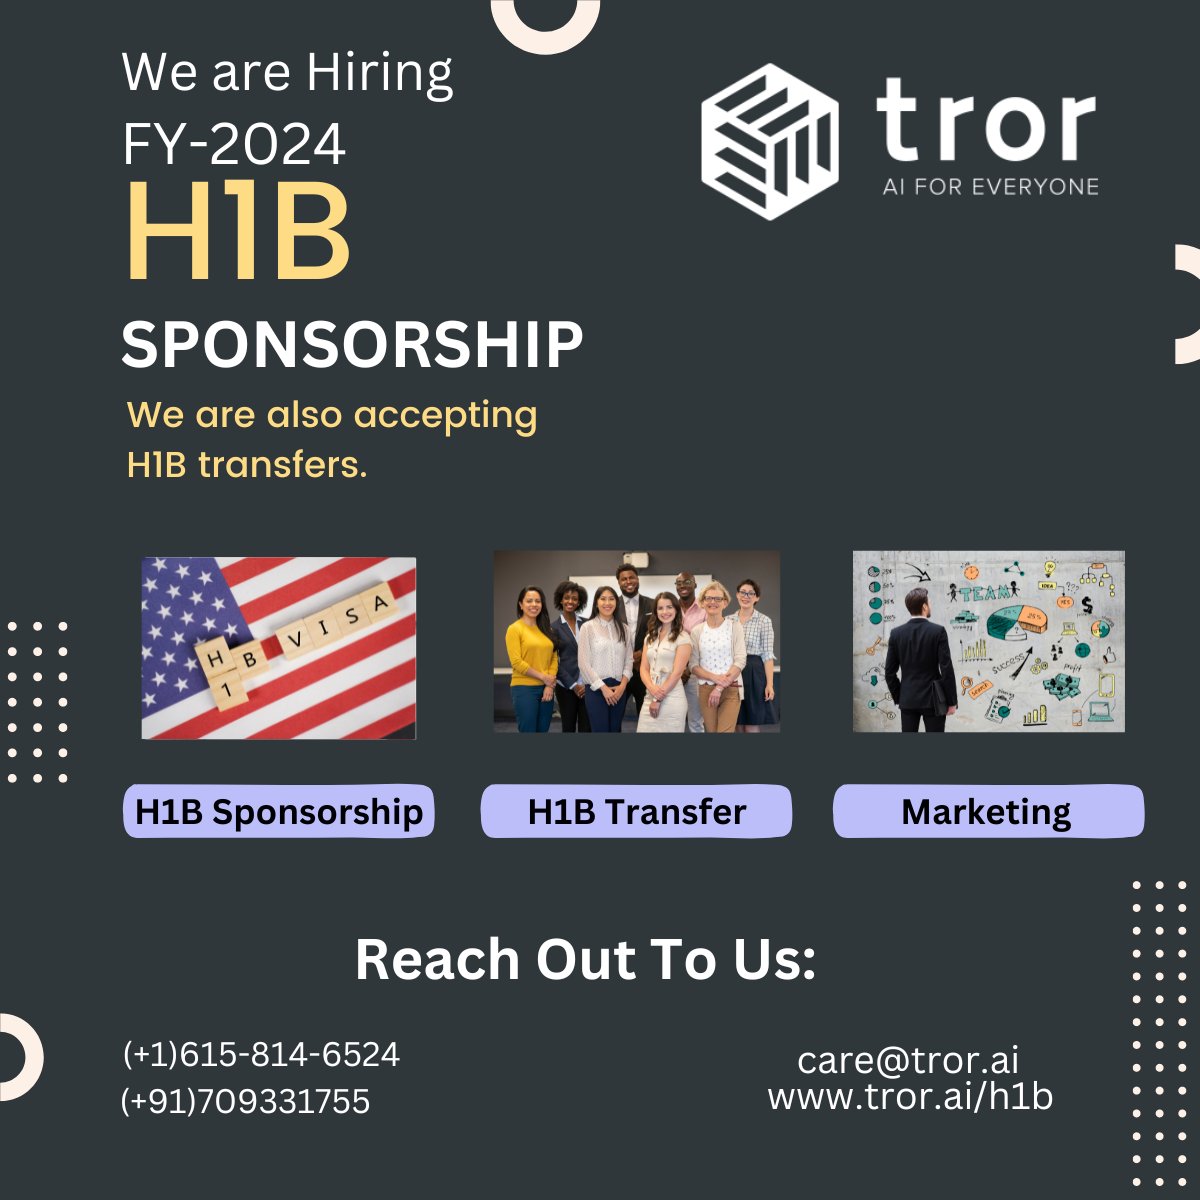 We are #hiring
We can help you with #H1BVisa Sponsorship and #h1btransfer
You can fill out the application form through the given link- tror.ai/h1b
For more details please connect with us
care@tror.ai
(+1)615-814-6524
(+91)7093317555
tror.ai

#h1bvisas